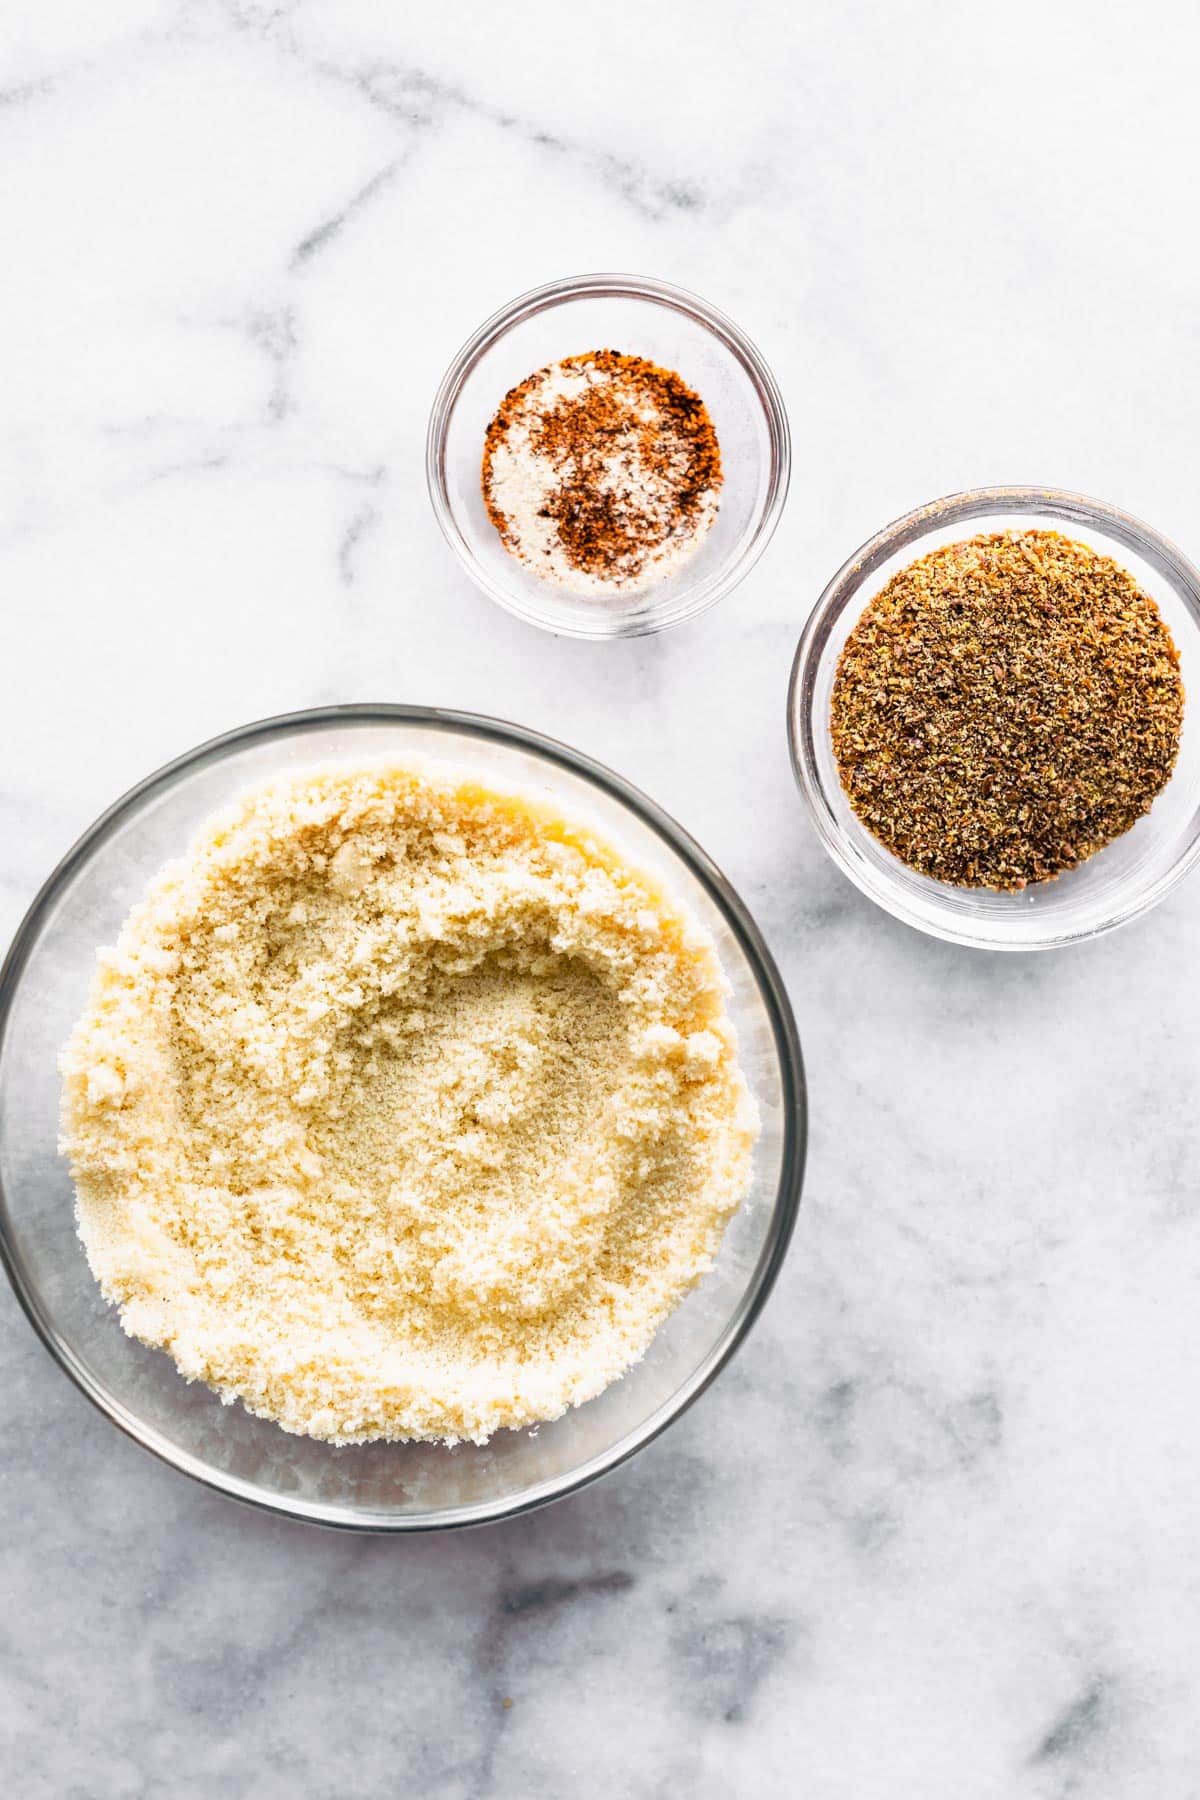 Bowls of almond flour, flax meal, and seasonings to make gluten-free panko.